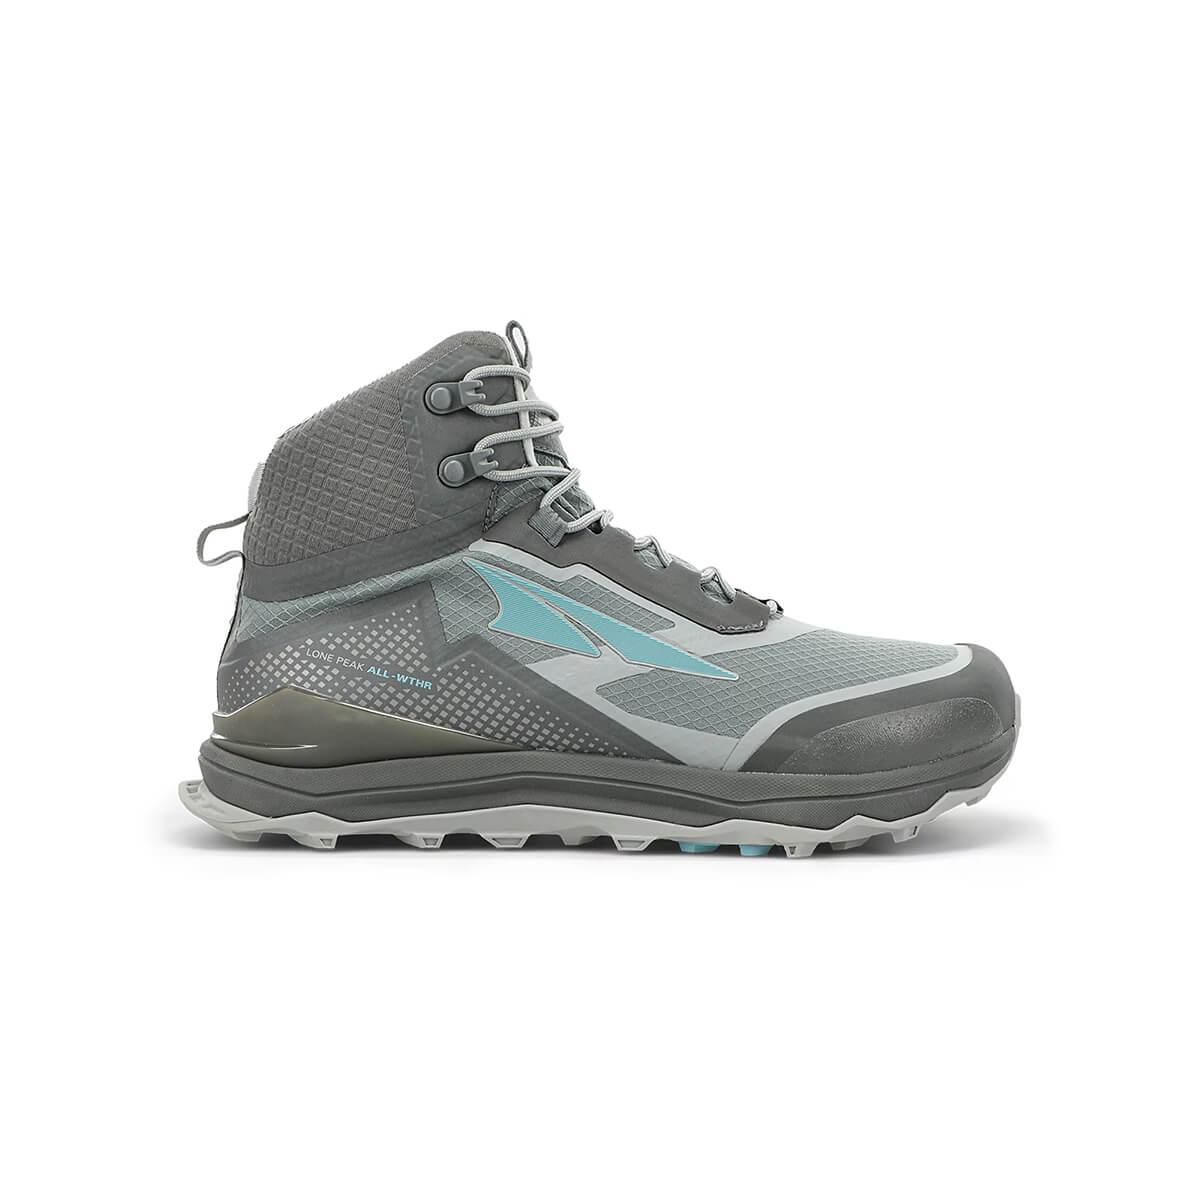  Women's Lone Peak All- Weather Mid Boots